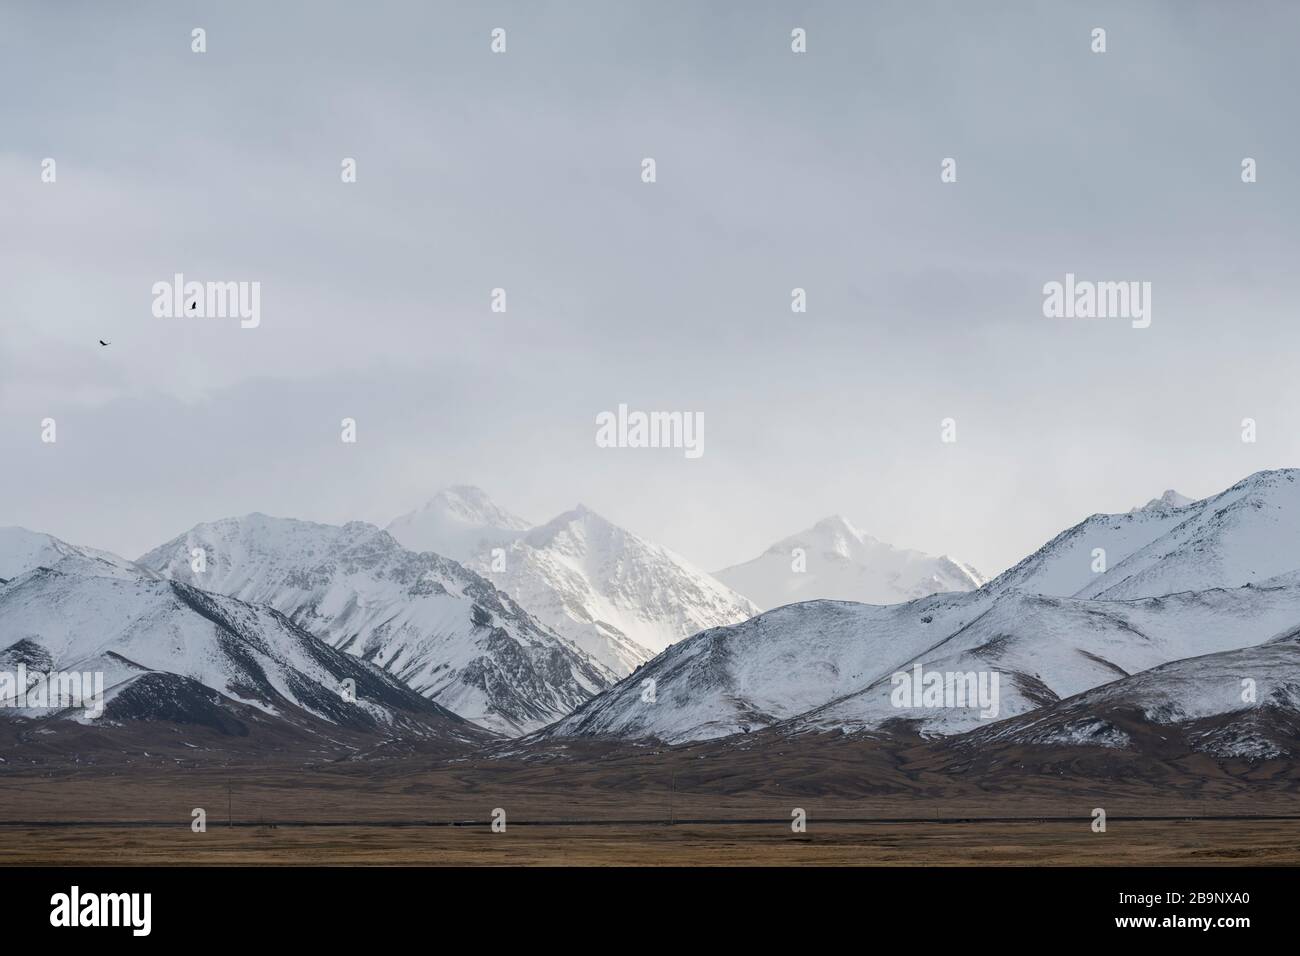 mountain landscape showing the typical Tian Shan mountains around Chatyr Kol lake in Kyrgyzstan Stock Photo